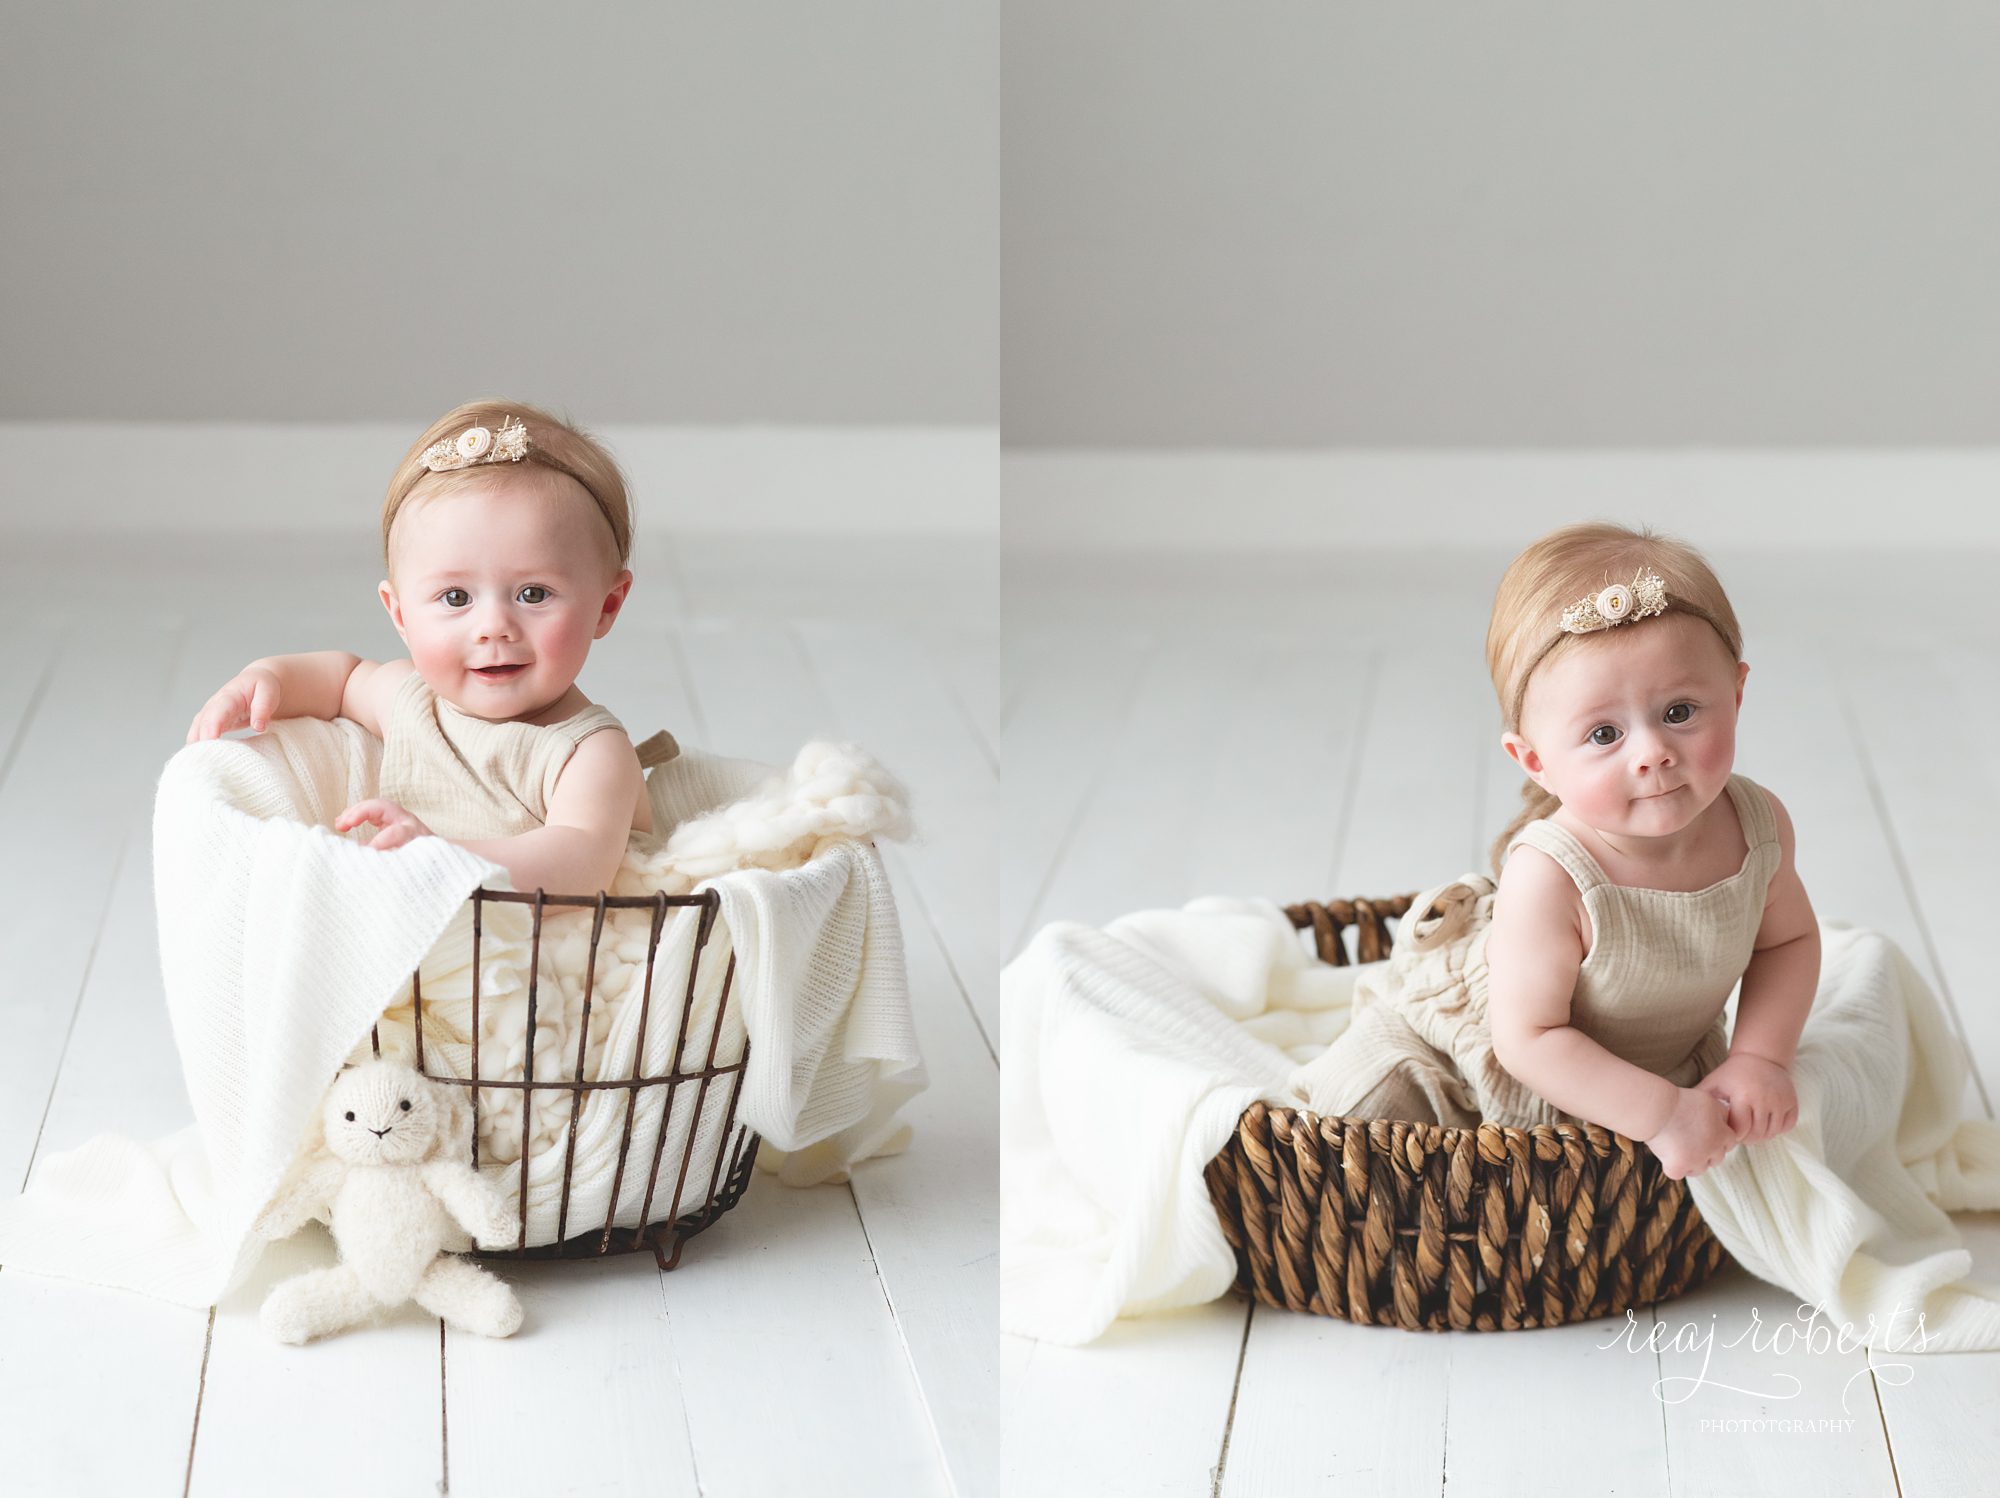 6 month baby sitting in vintage wire egg basket in neutral colors | Reaj Roberts Photography